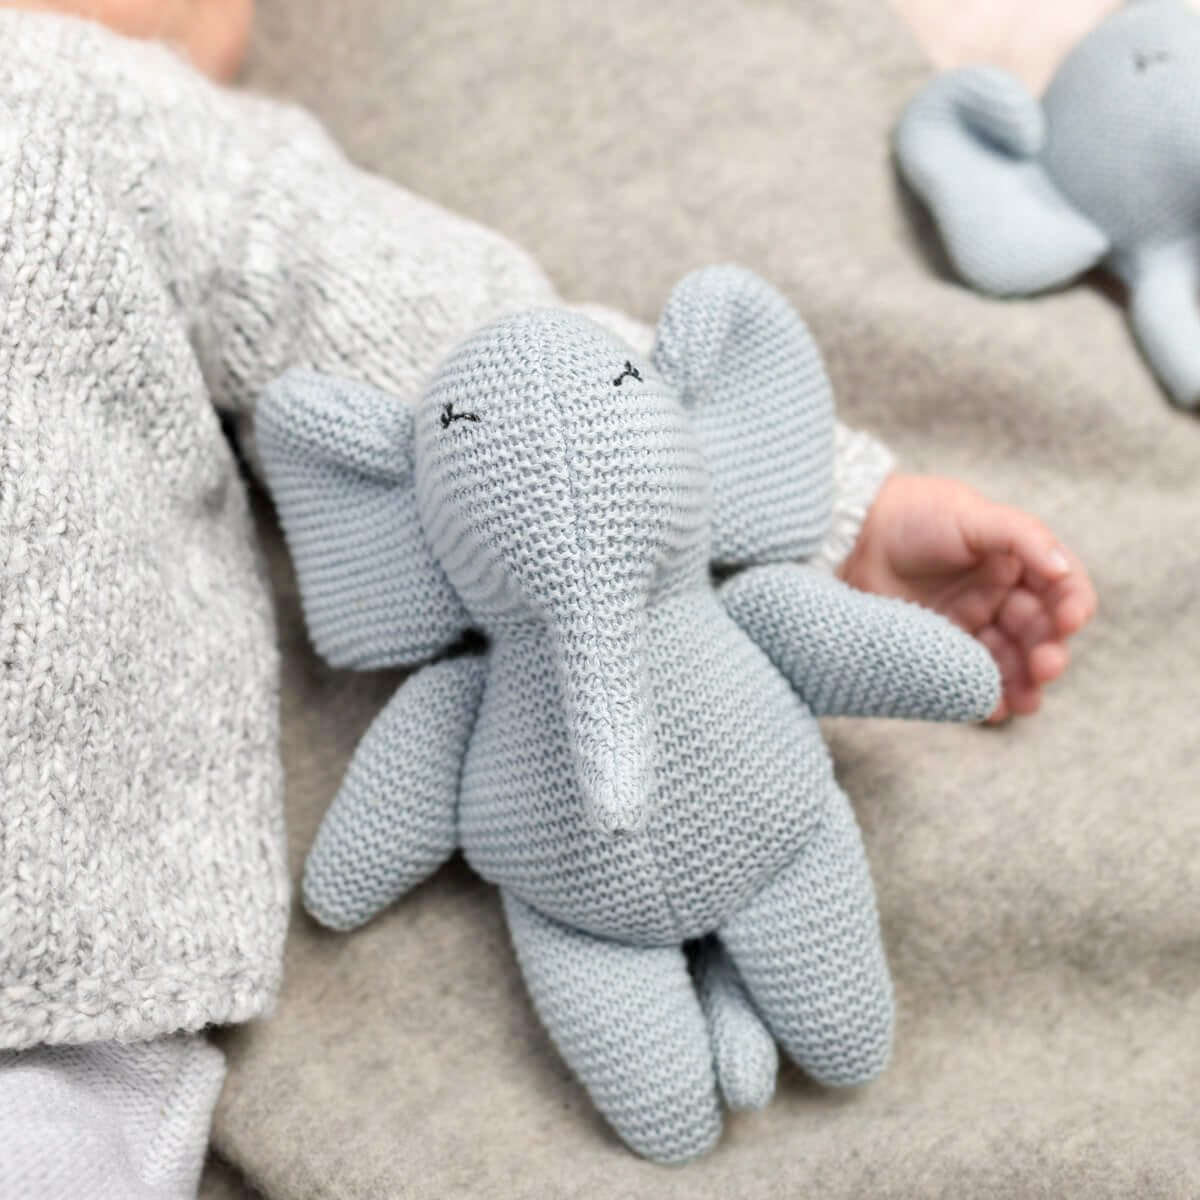 baby bello elvy the elephant baby soft toy